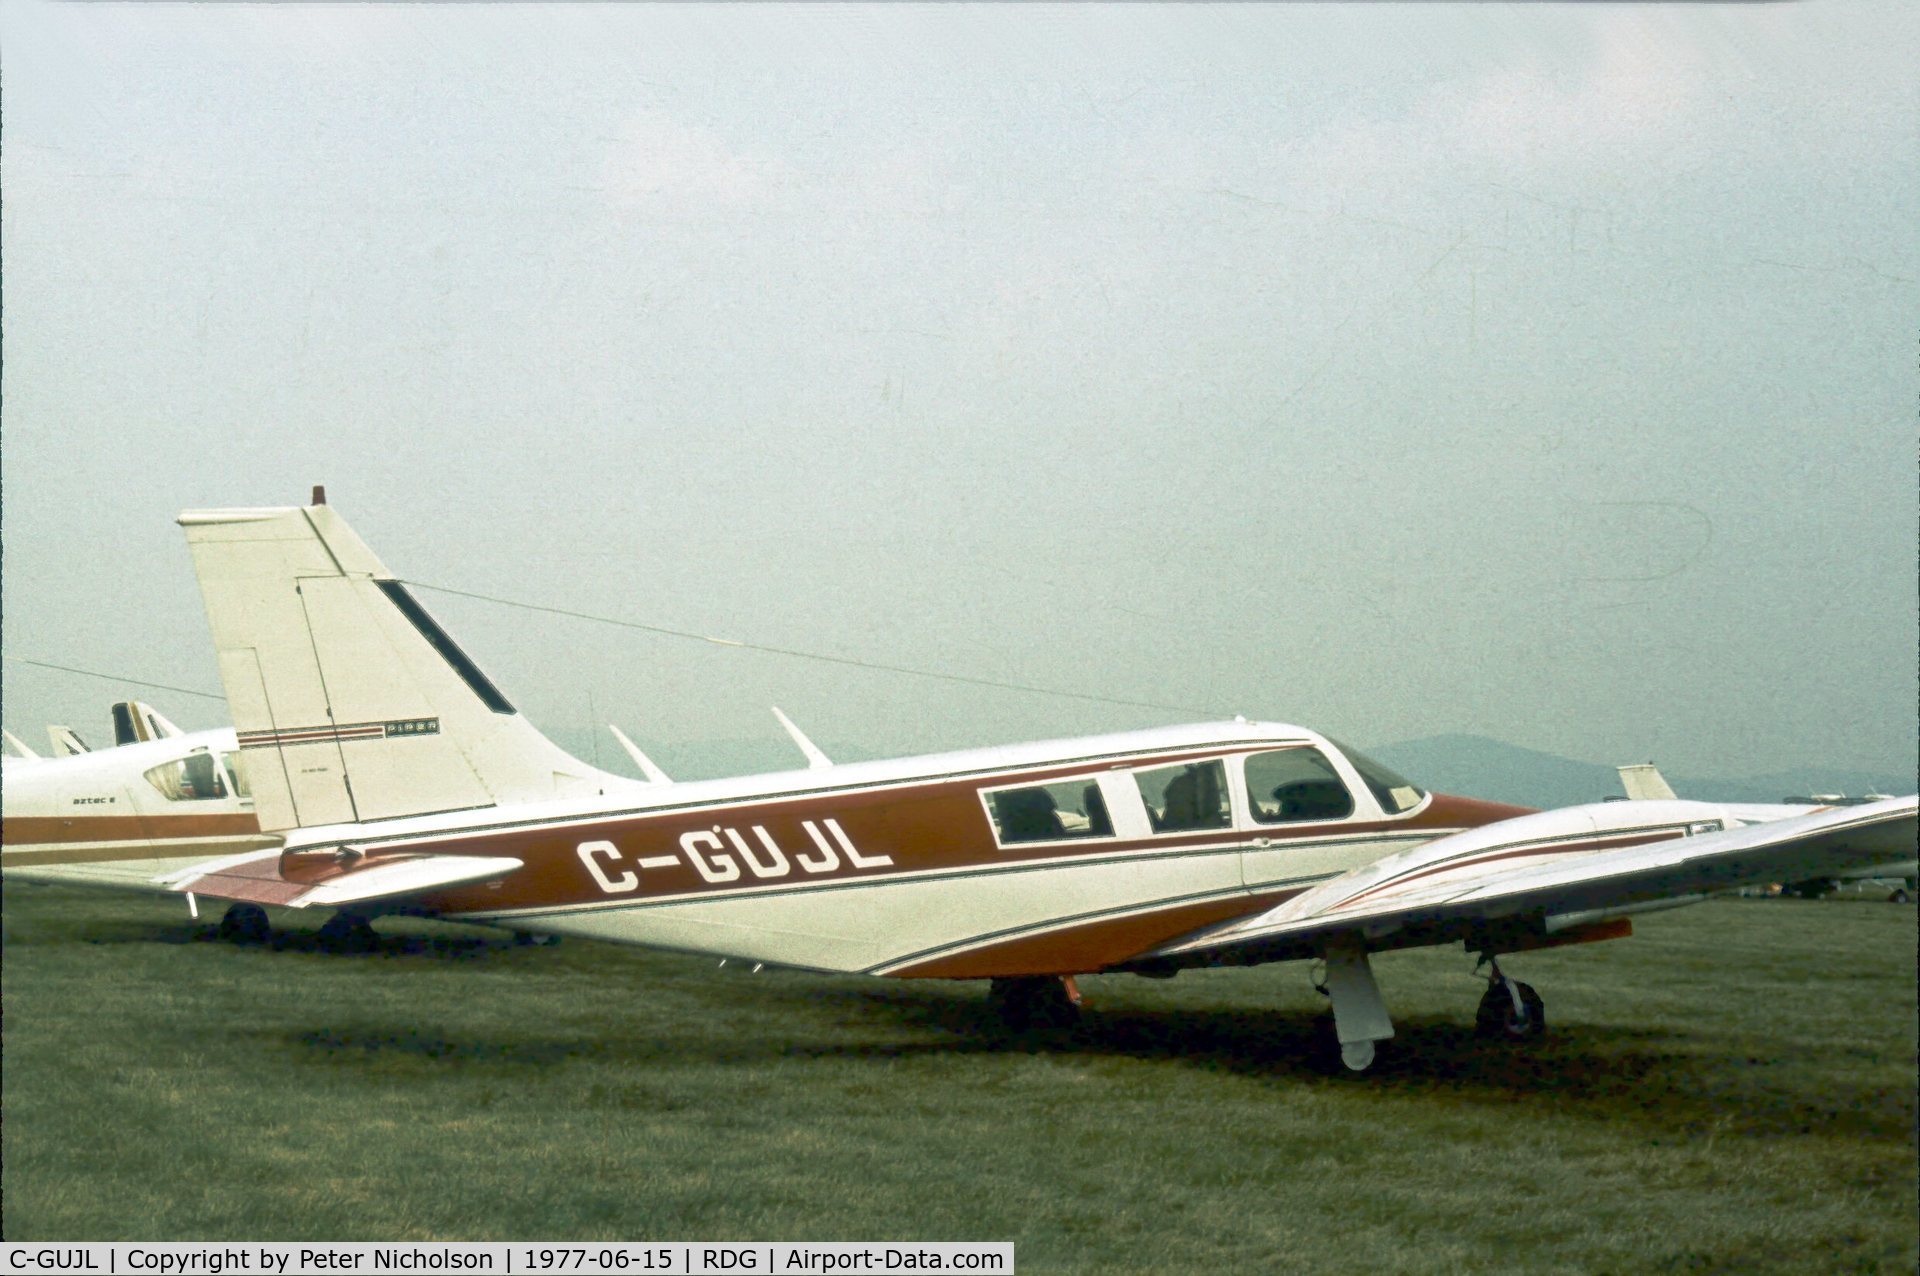 C-GUJL, Piper PA-34-200 C/N 34-7350090, In 1977 this Seneca attended the 1977 Reading Airshow.